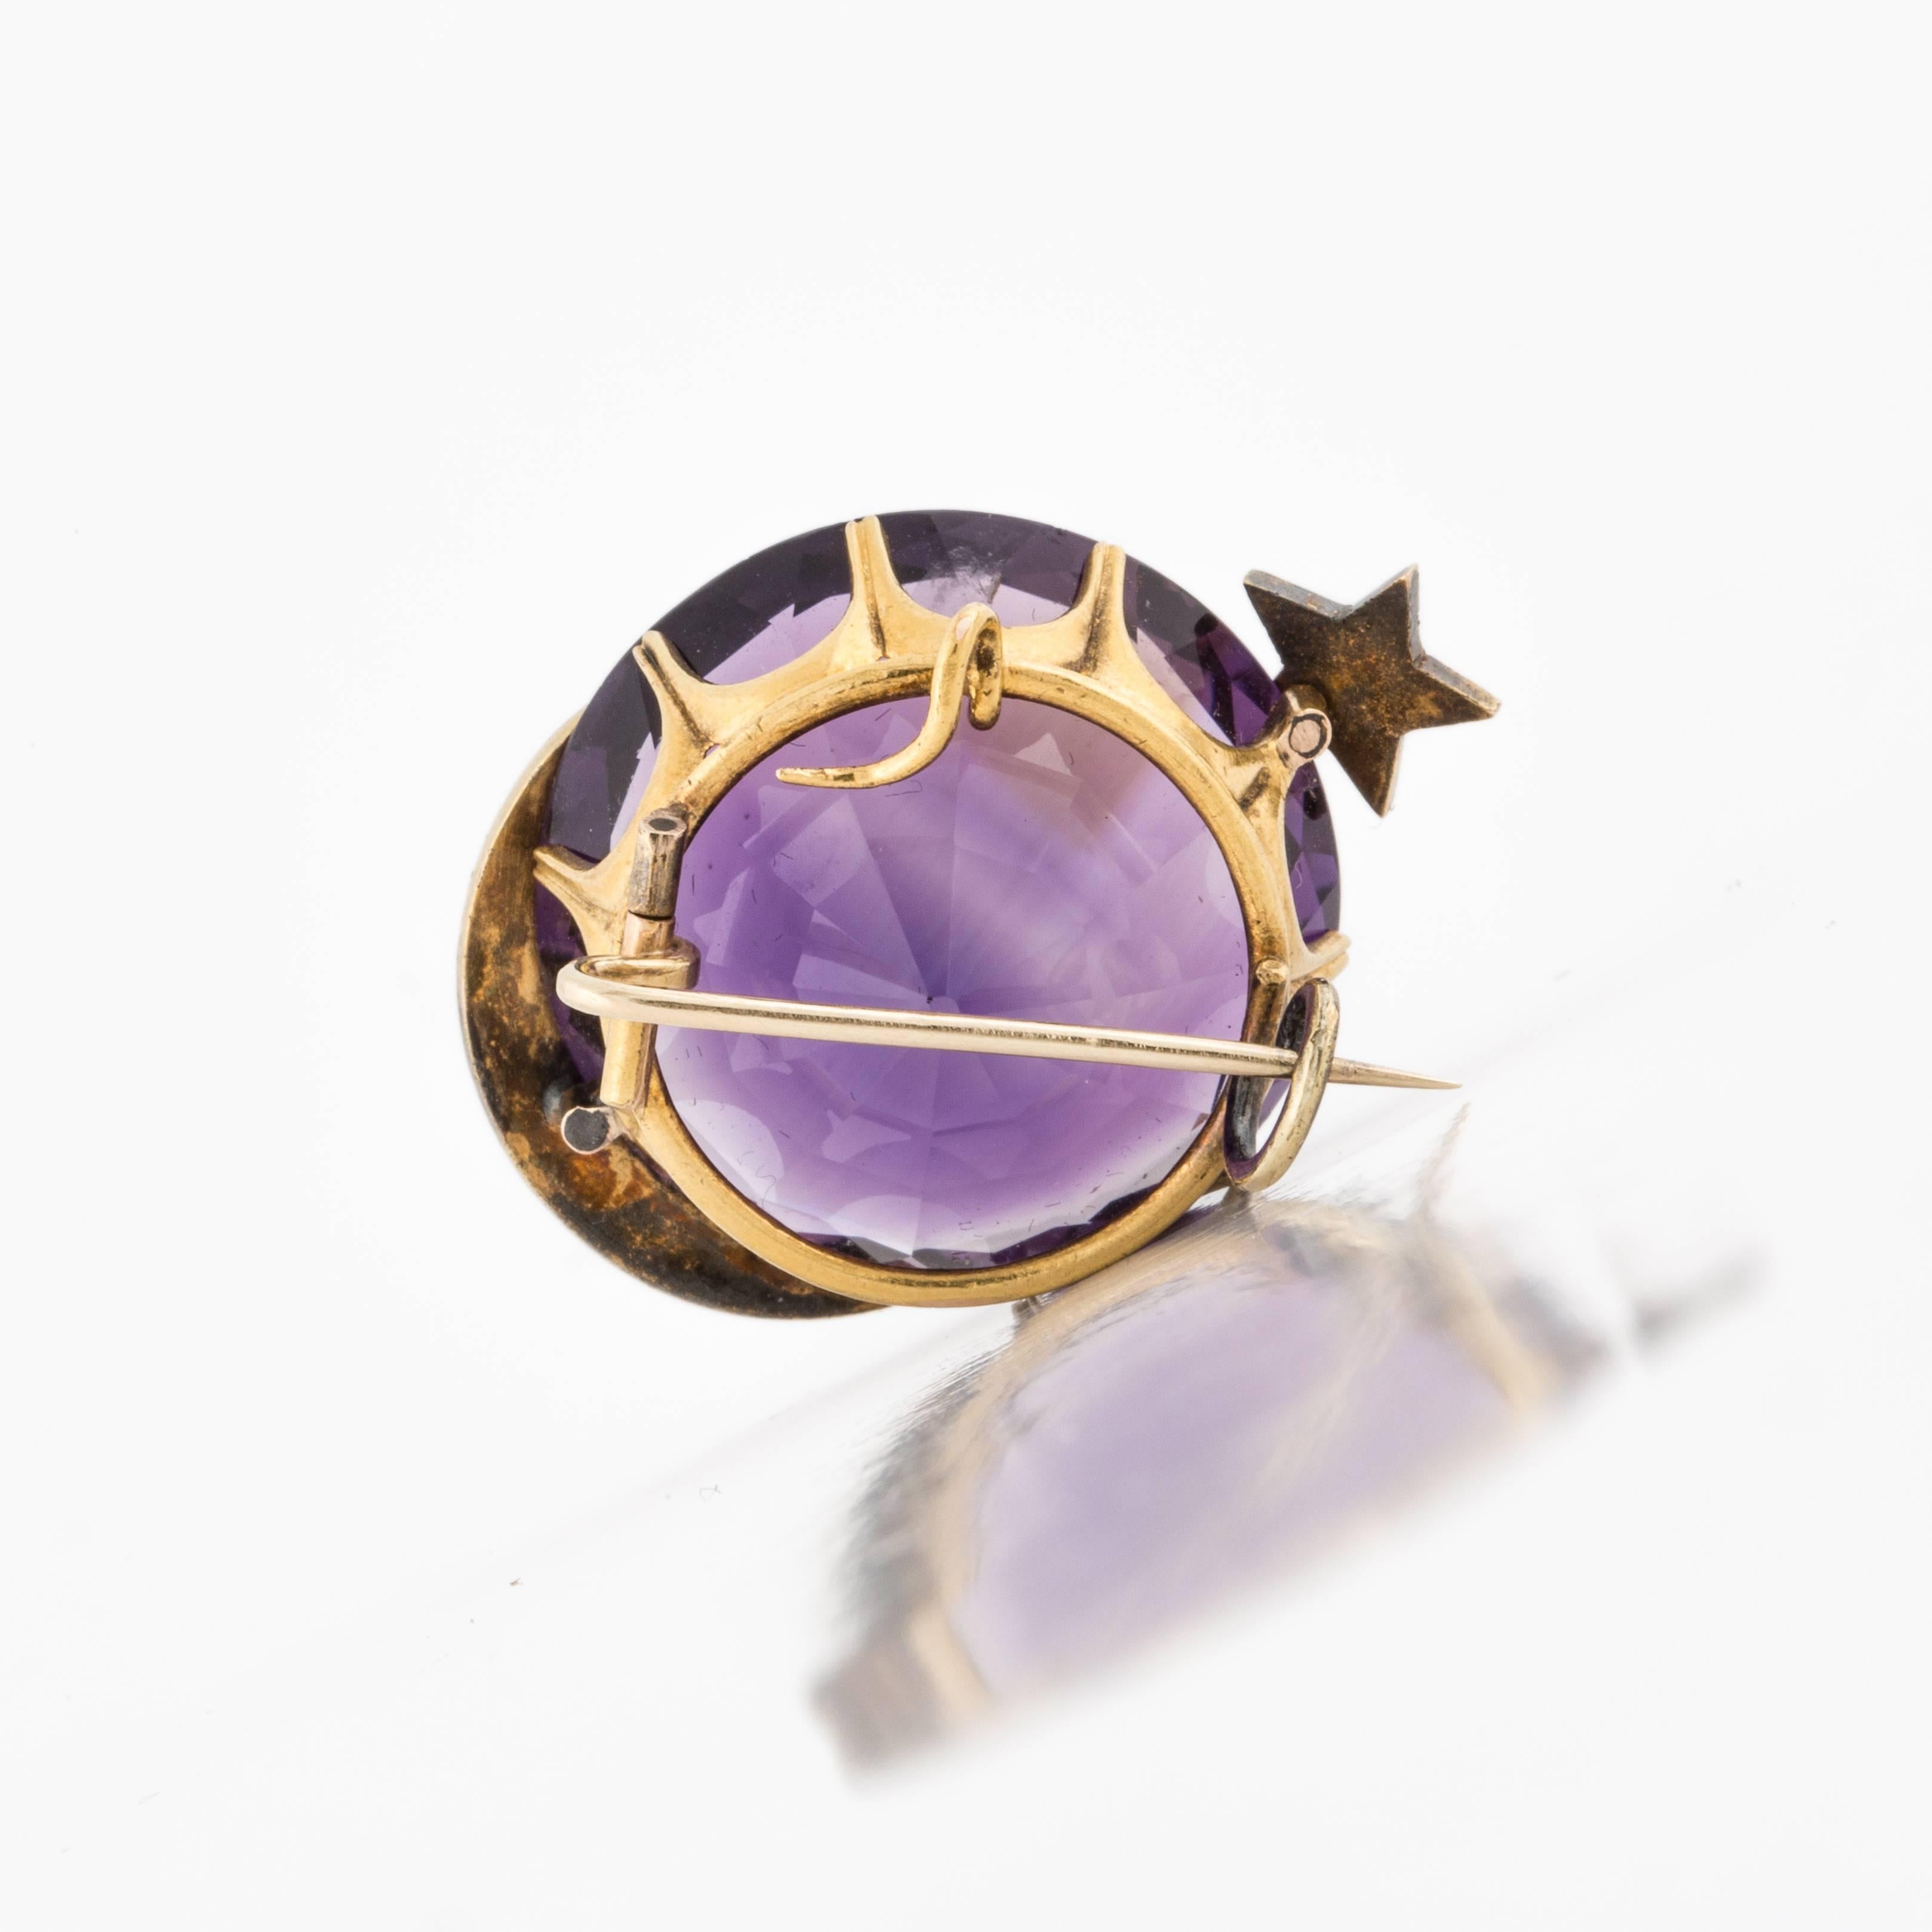 Antique watch pin in 15K yellow gold featuring a 40carat amethyst in the center.  The moon and star is represented in split pearls.  Stone is set in a crown mounting and the clasp has no safety.  Measures 1 3/8 inches across and it stands 1/2 inch